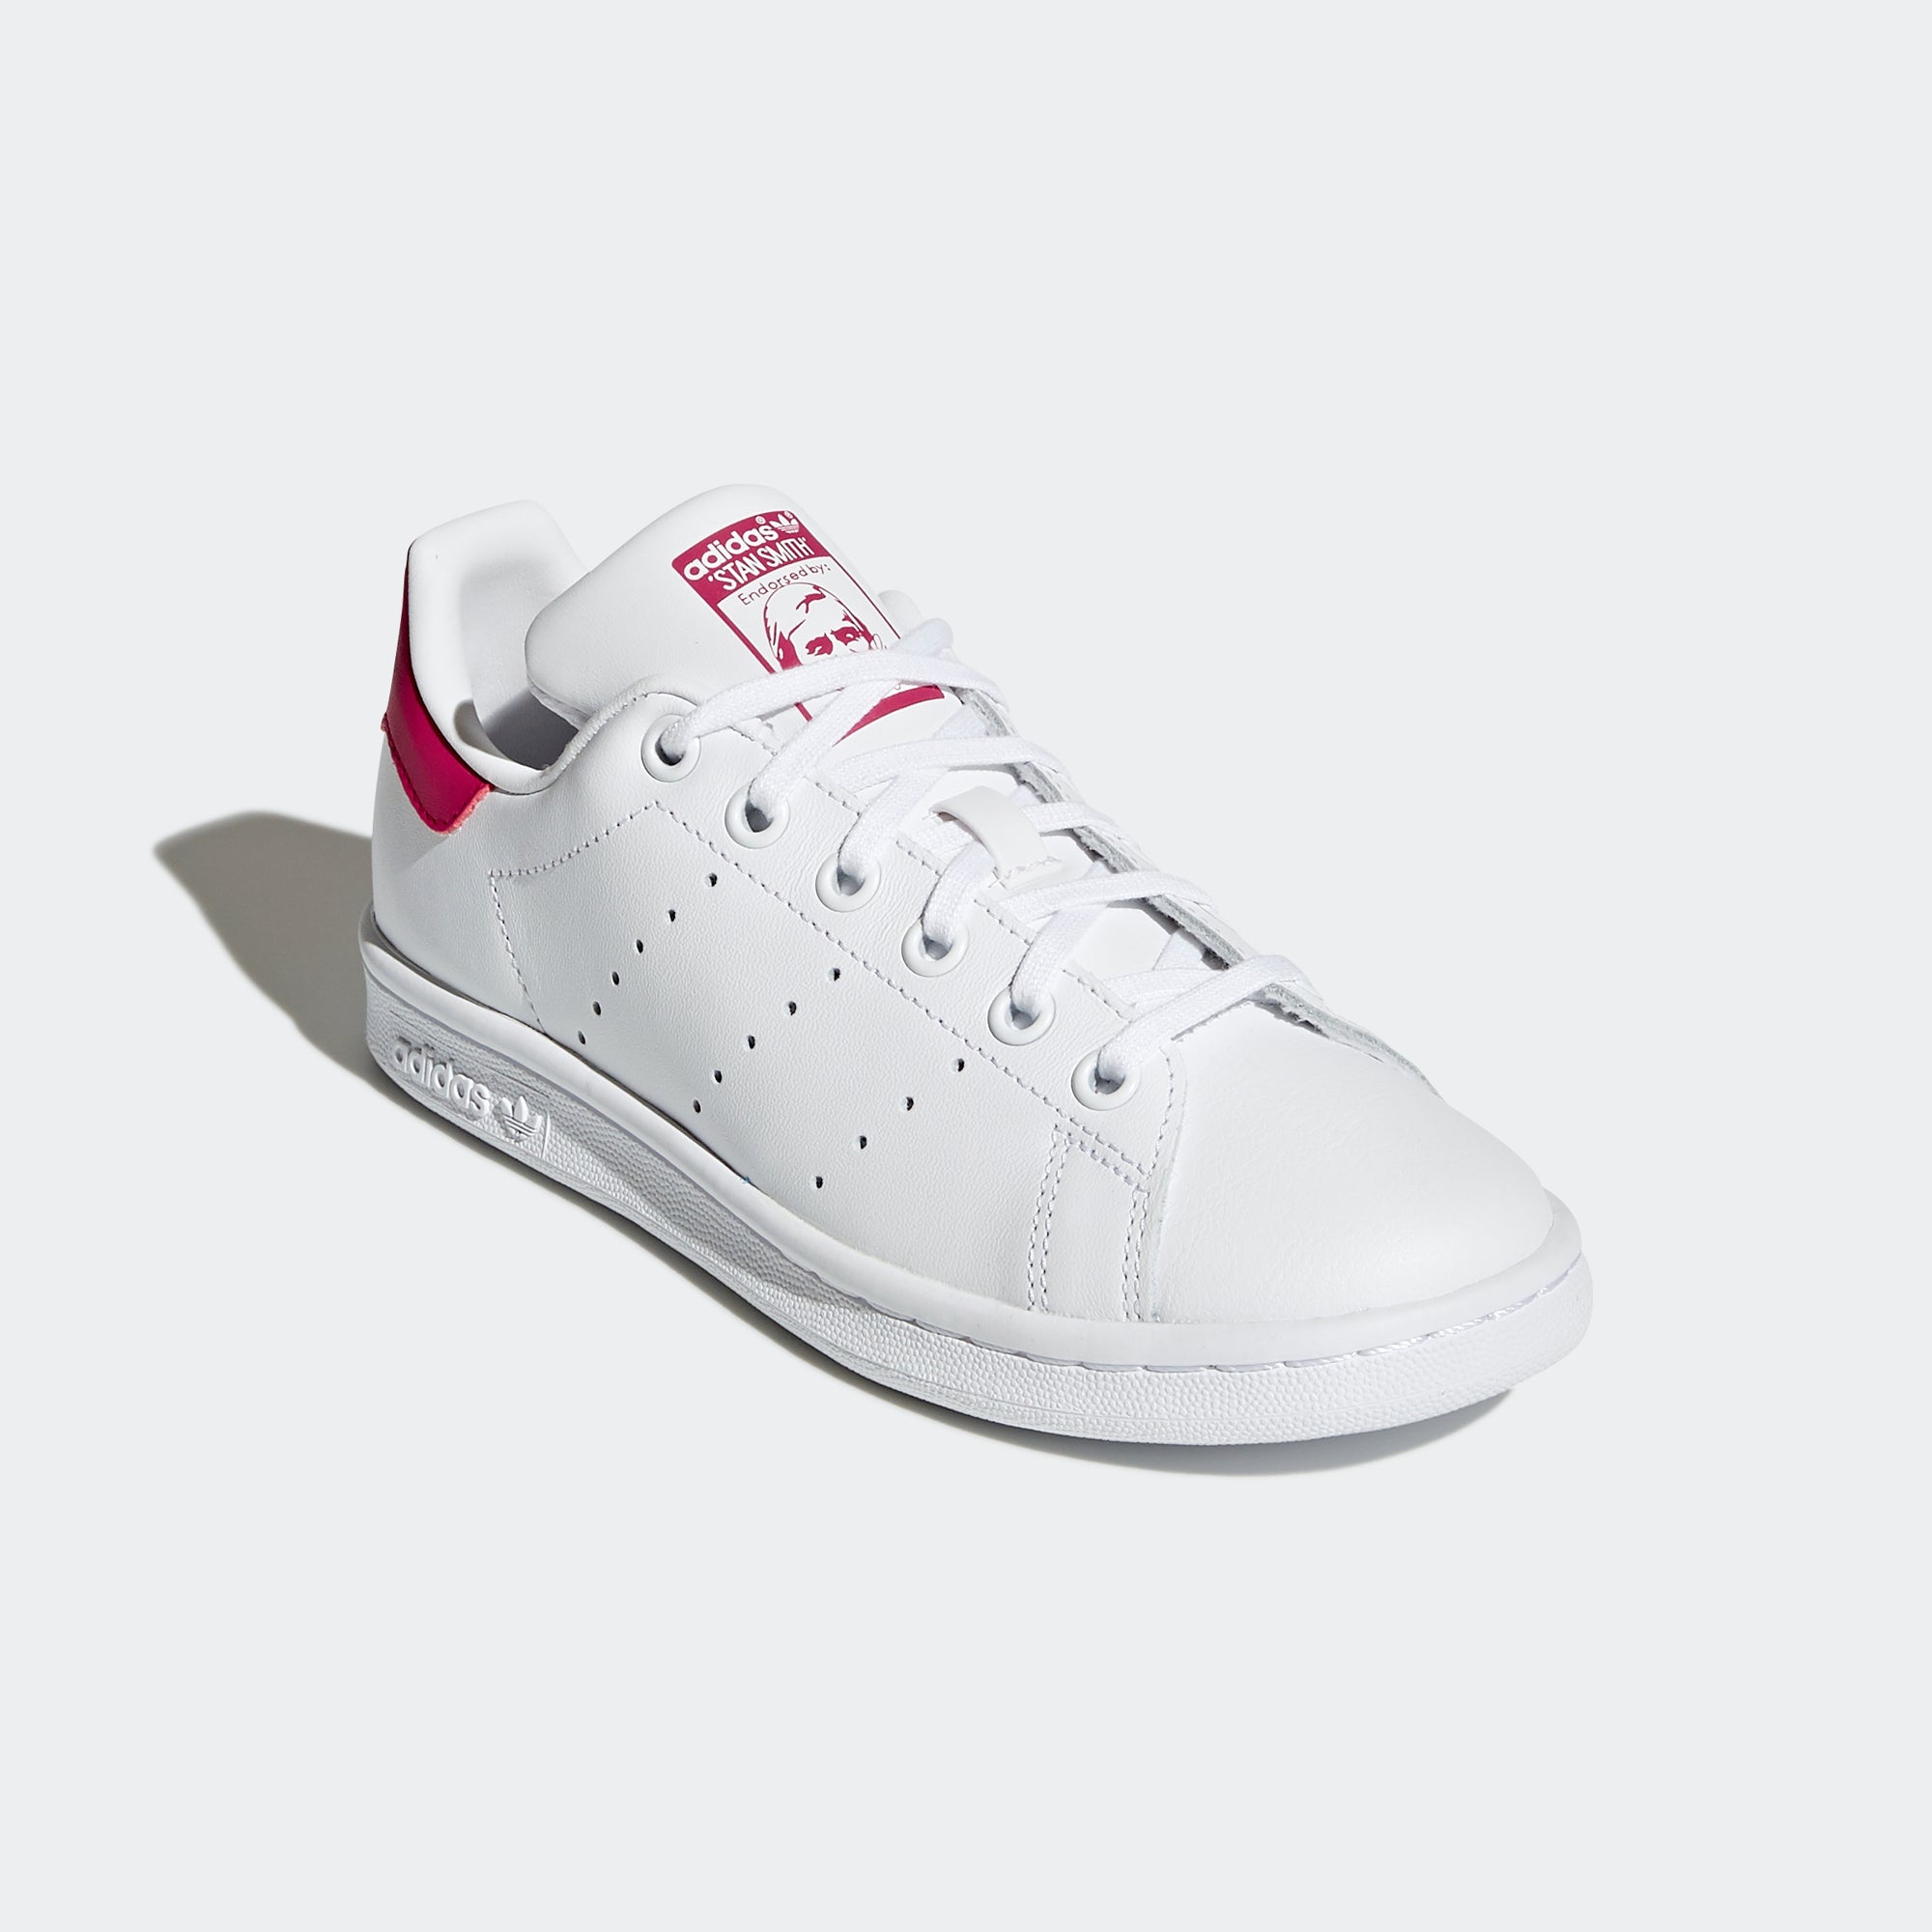 B32703 Chicago | Stan City Sports Pink White adidas Smith Bold Shoes